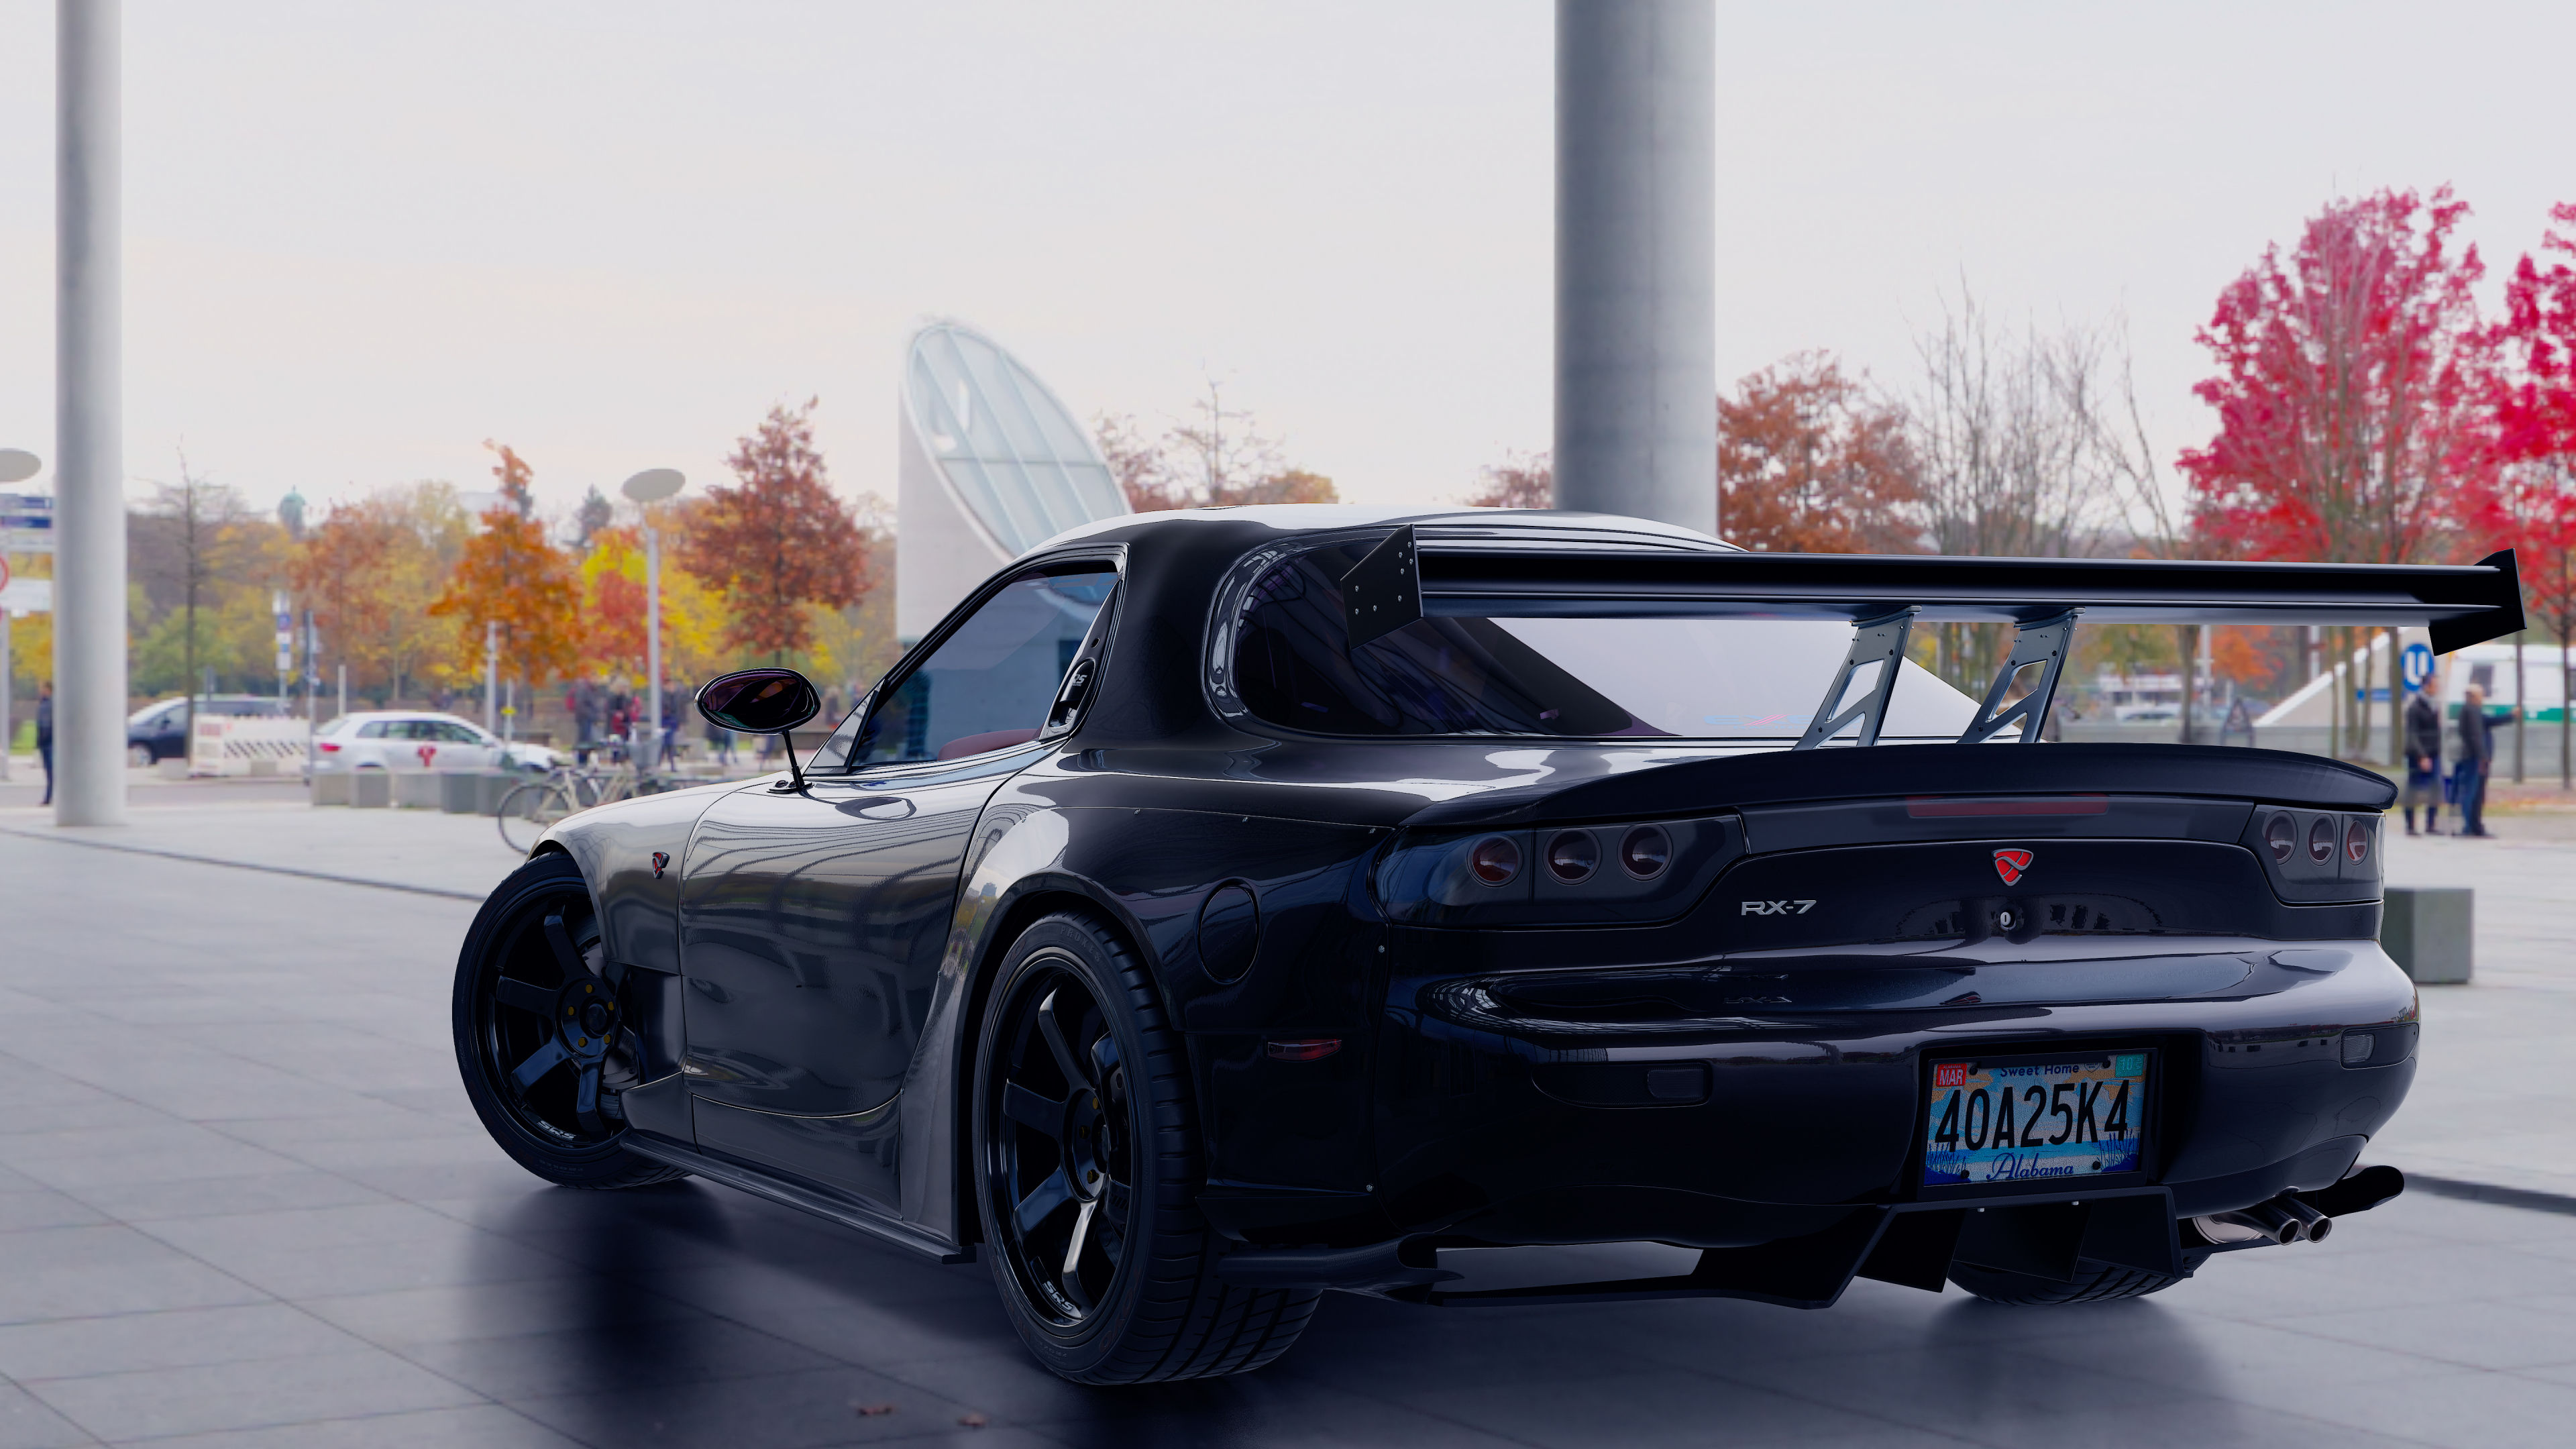 Mazda RX-7 in Blender cycles render immagine